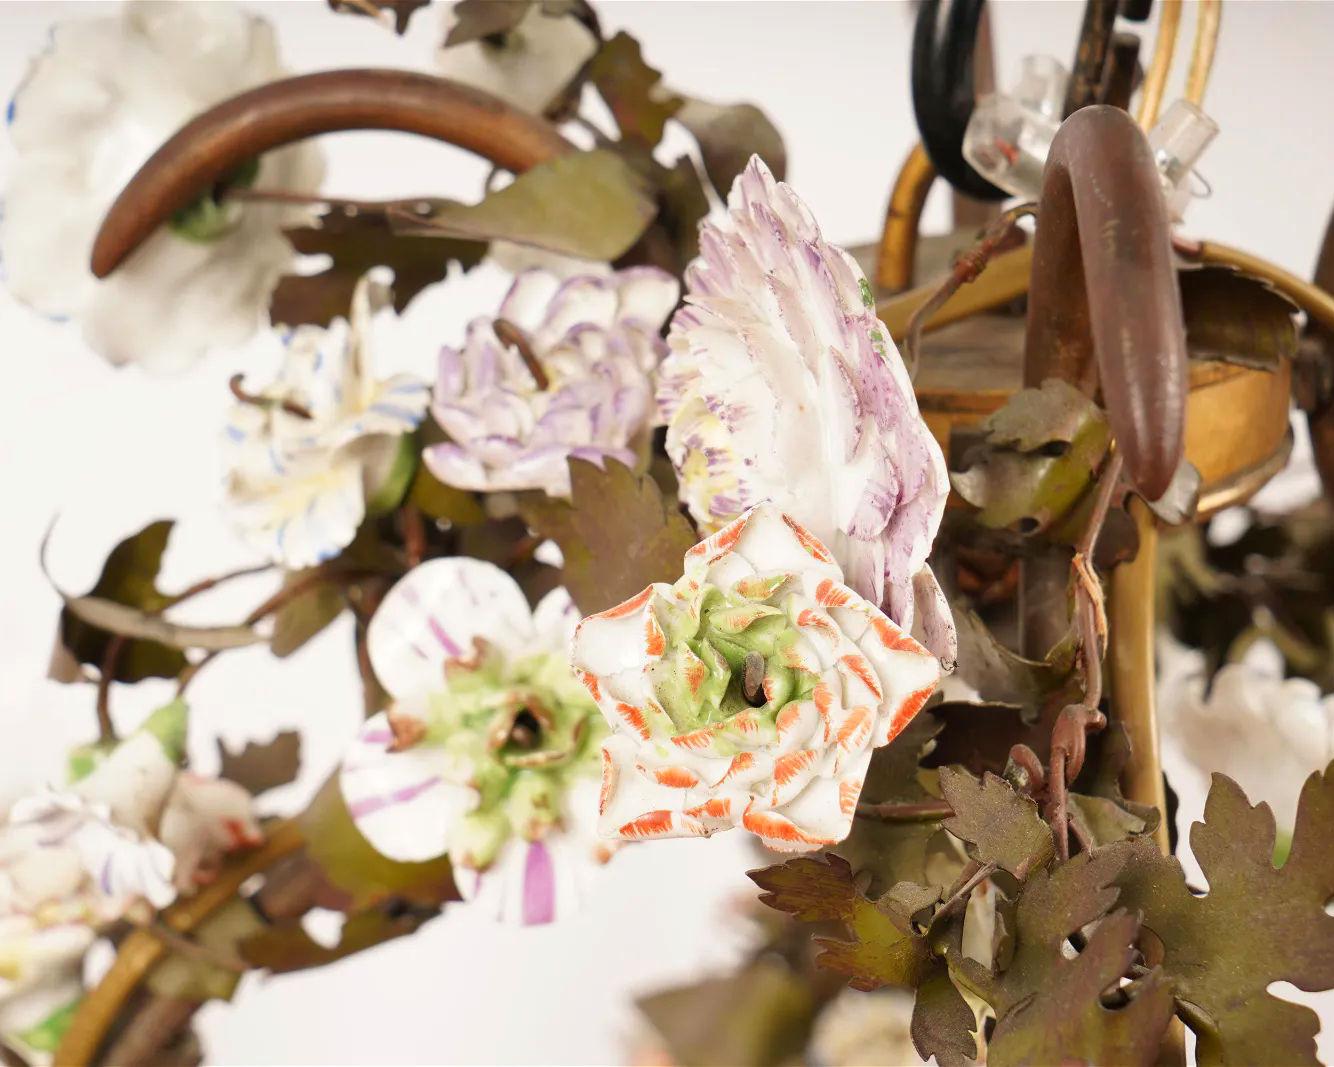 Our very large English chandelier in the form flowering vines features a porcelain jardiniere at center and eight electrified candle arms, and supplemental small bayonet style sockets (English B22 standard) on the tops of each arm. One of the finest